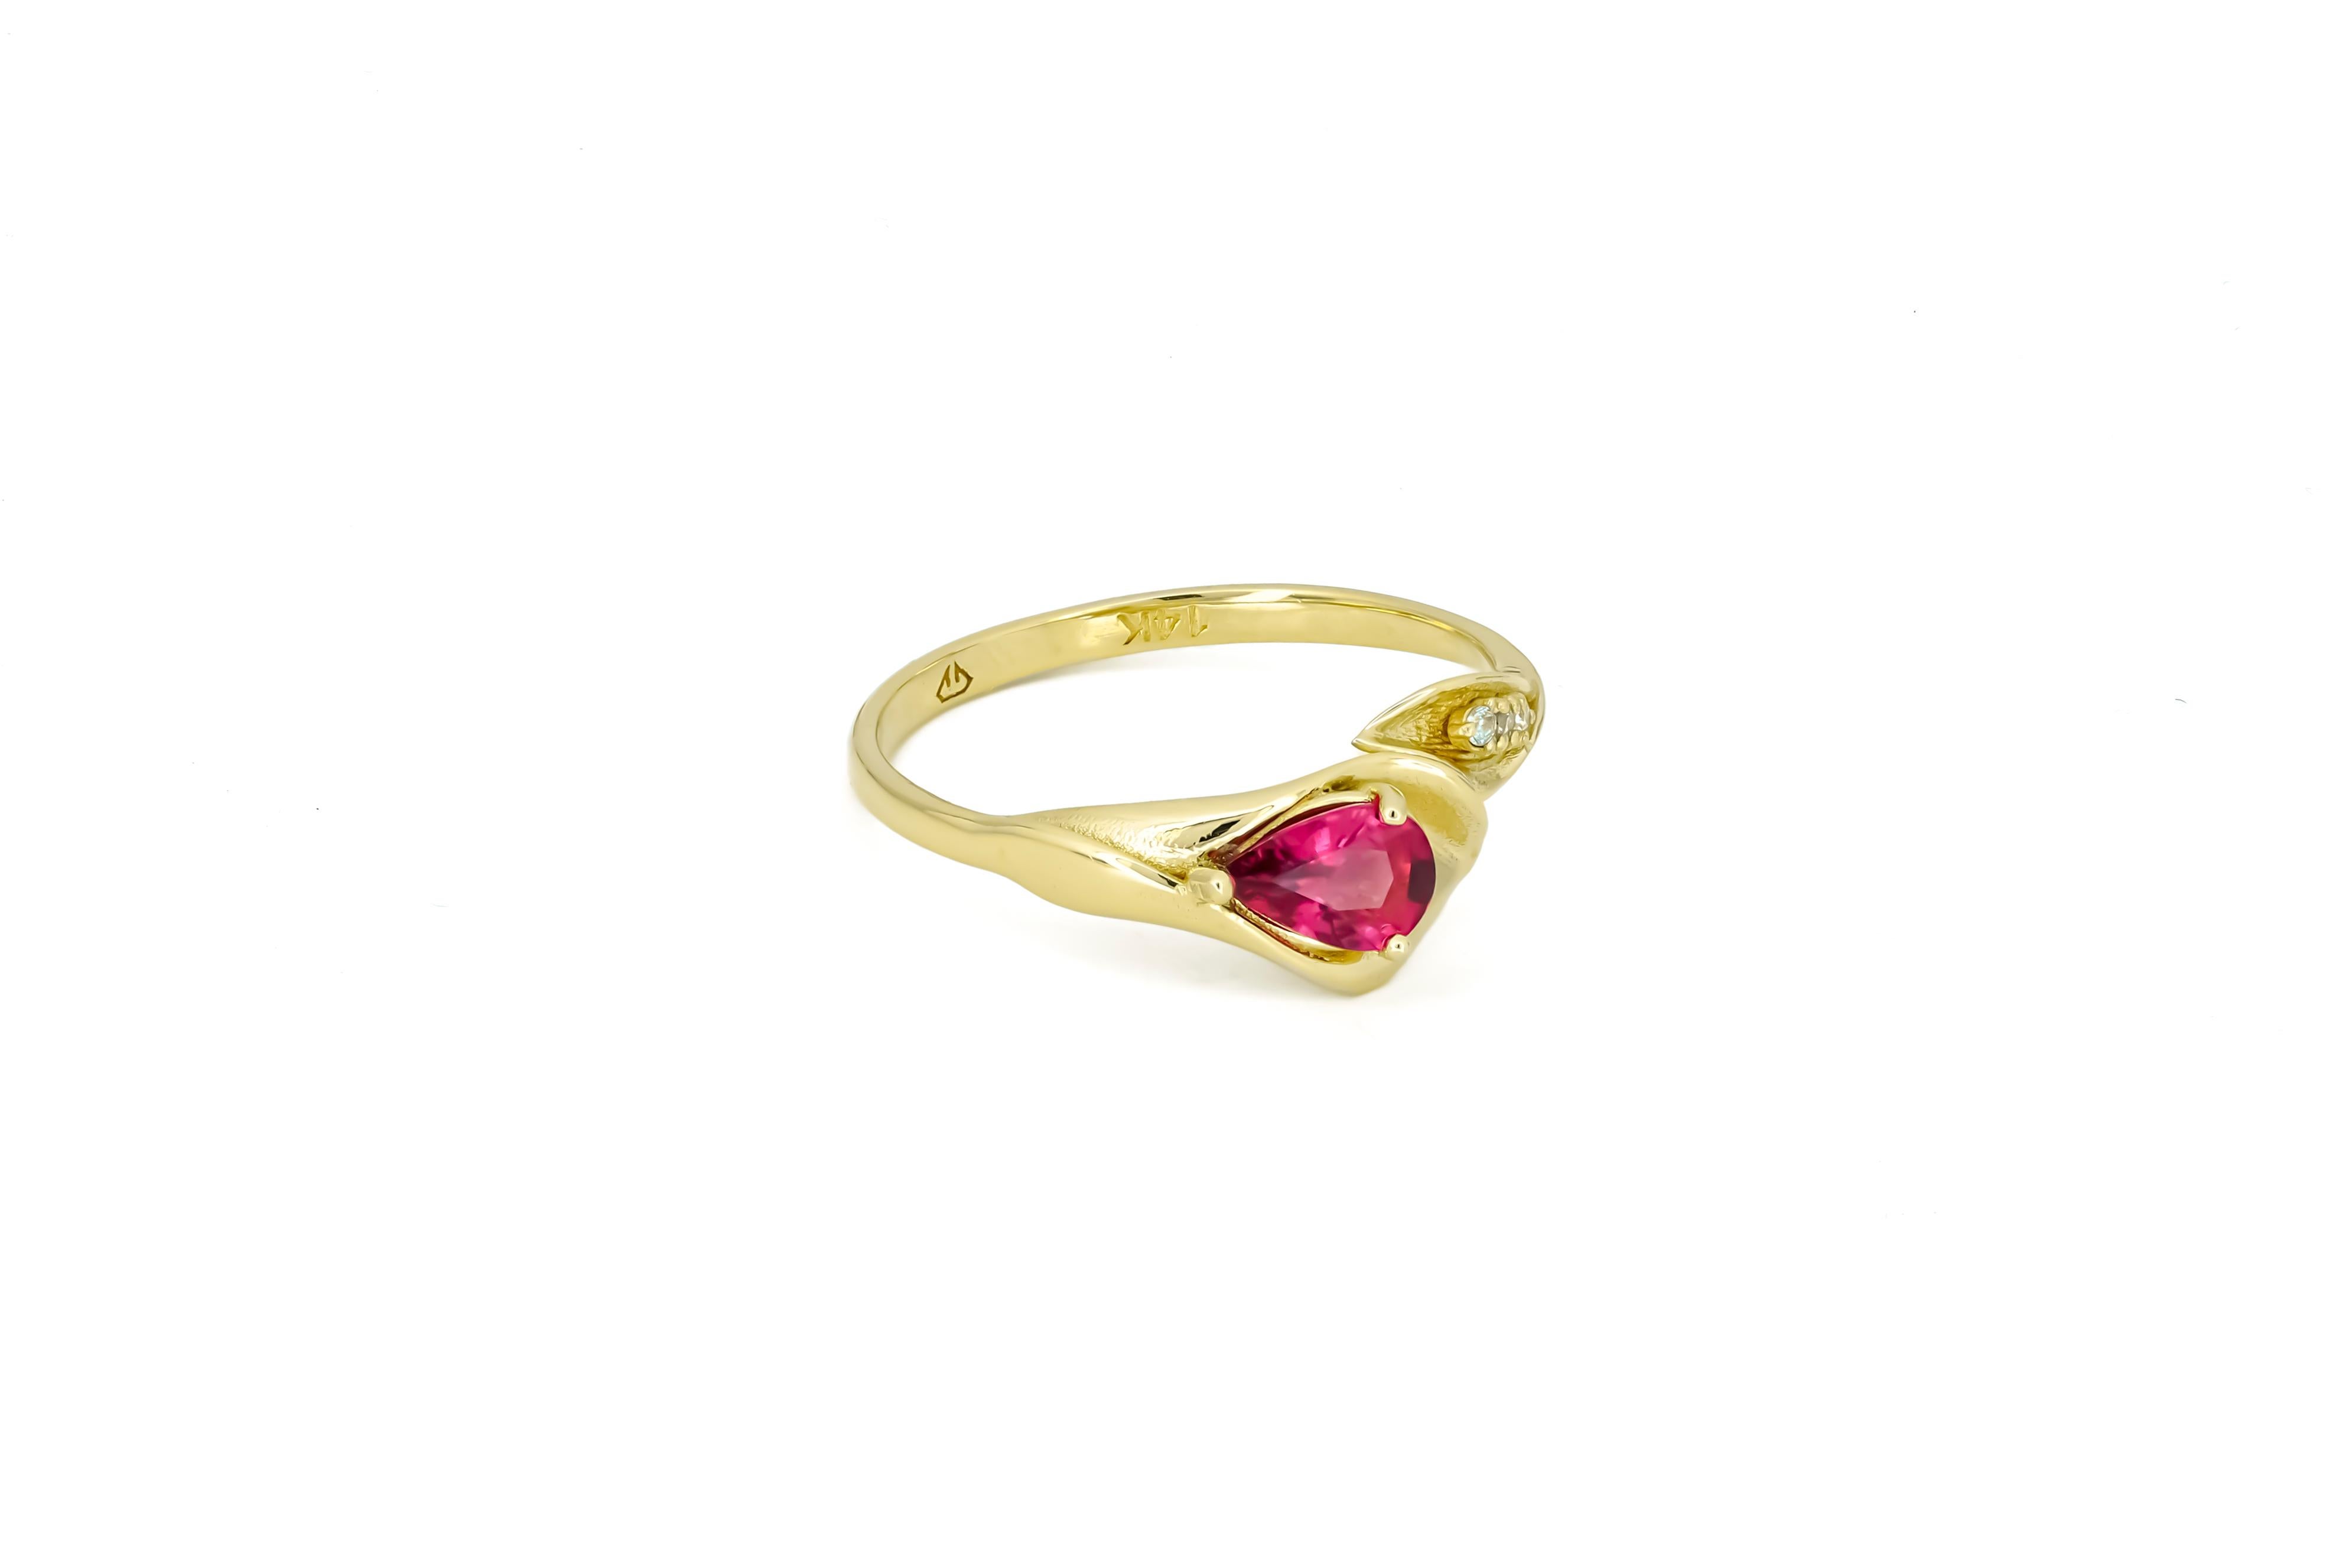 Lily Calla Gold Ring, 14 Karat Gold Ring with Garnet and Diamonds For Sale 7